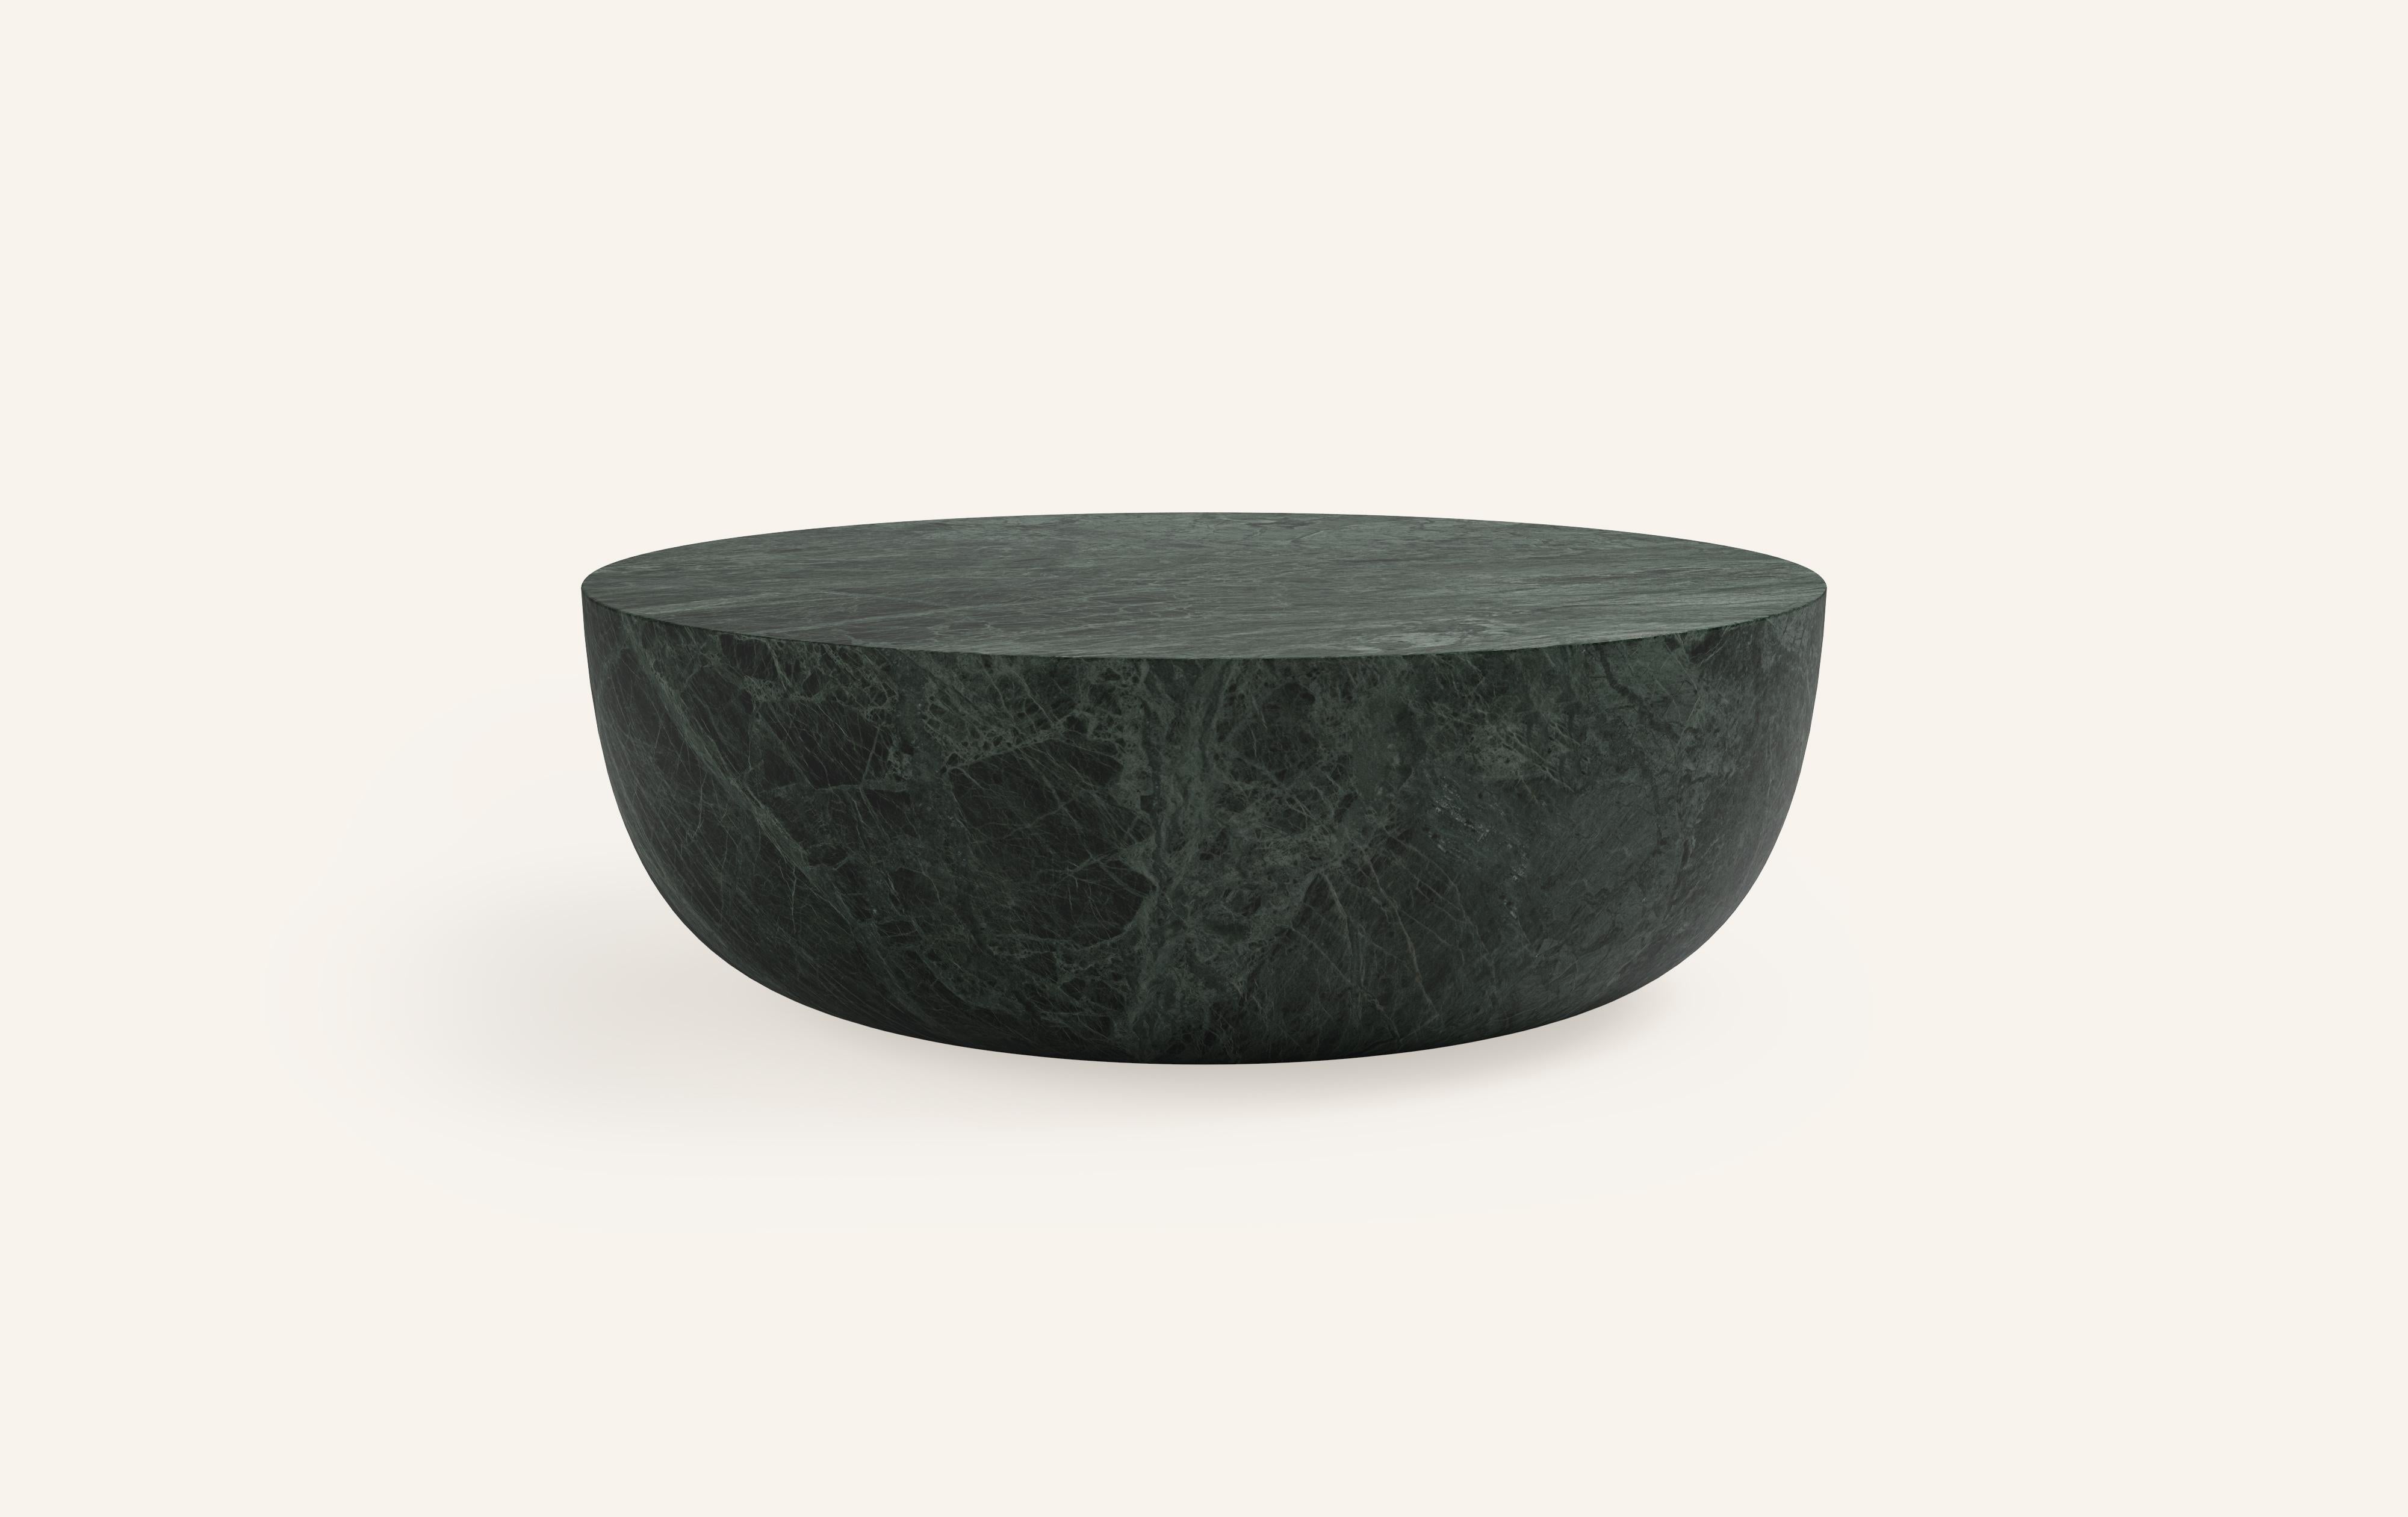 A SLICE OF A ’SPHERE’ OR 'SFERA' IN ITALIAN BALANCES A FLAT SURFACE ATOP AND ROBUST MONOLITH FORM. WITH A BASE SOFTENED BY A CURVED PROFILE, SFERA IS SOFT AND EARTHY IN ITS AVAILABLE STONE SELECTIONS.

DIMENSIONS: 
42”L x 42”W x 16”H: 
- SOLID